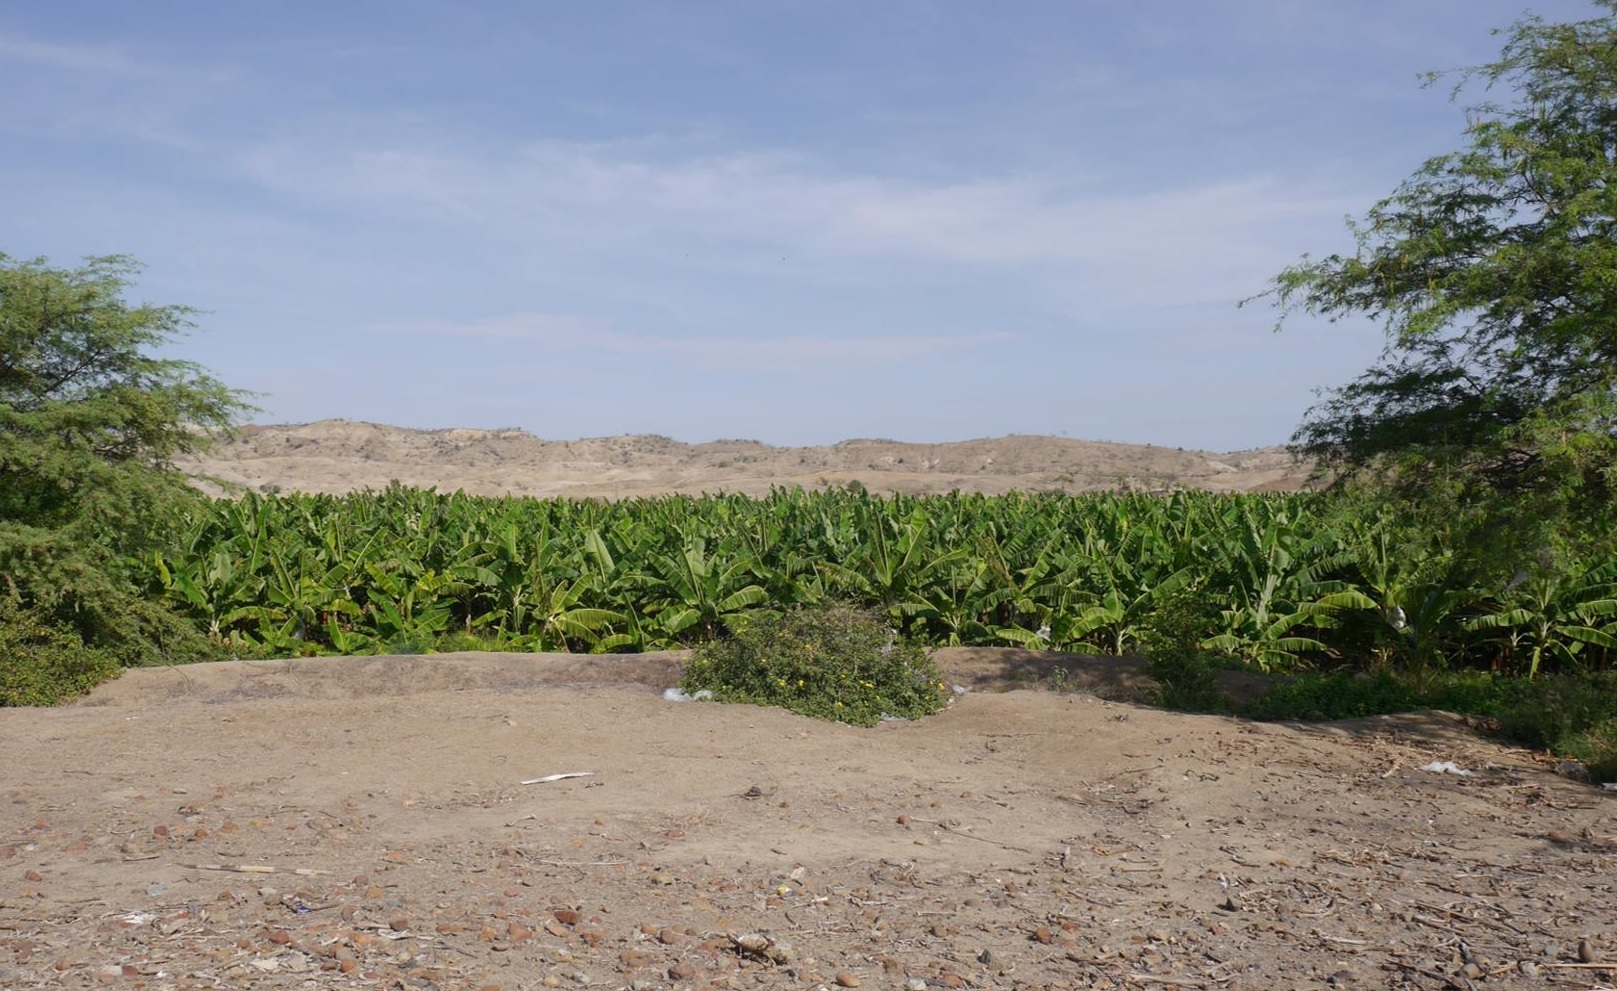 Organic bananas field shows agroindustry within an arid ecosystem